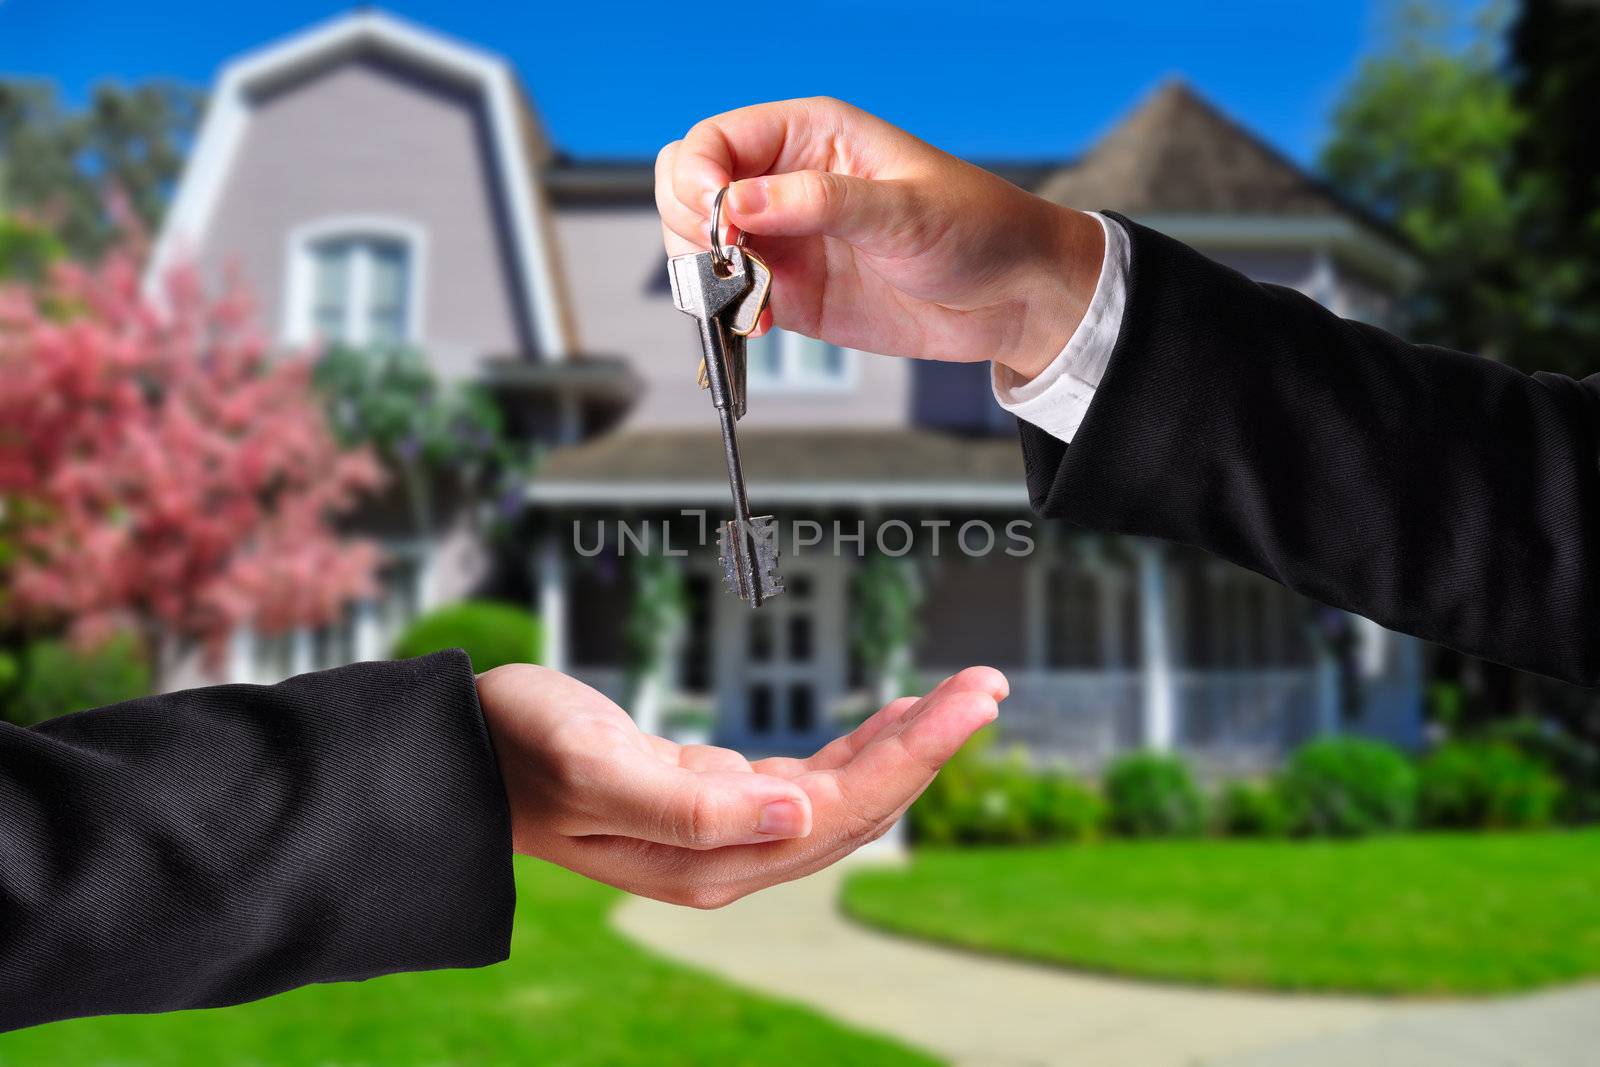 A hand giving a key to another hand. Both persons in suits and a house in the background.